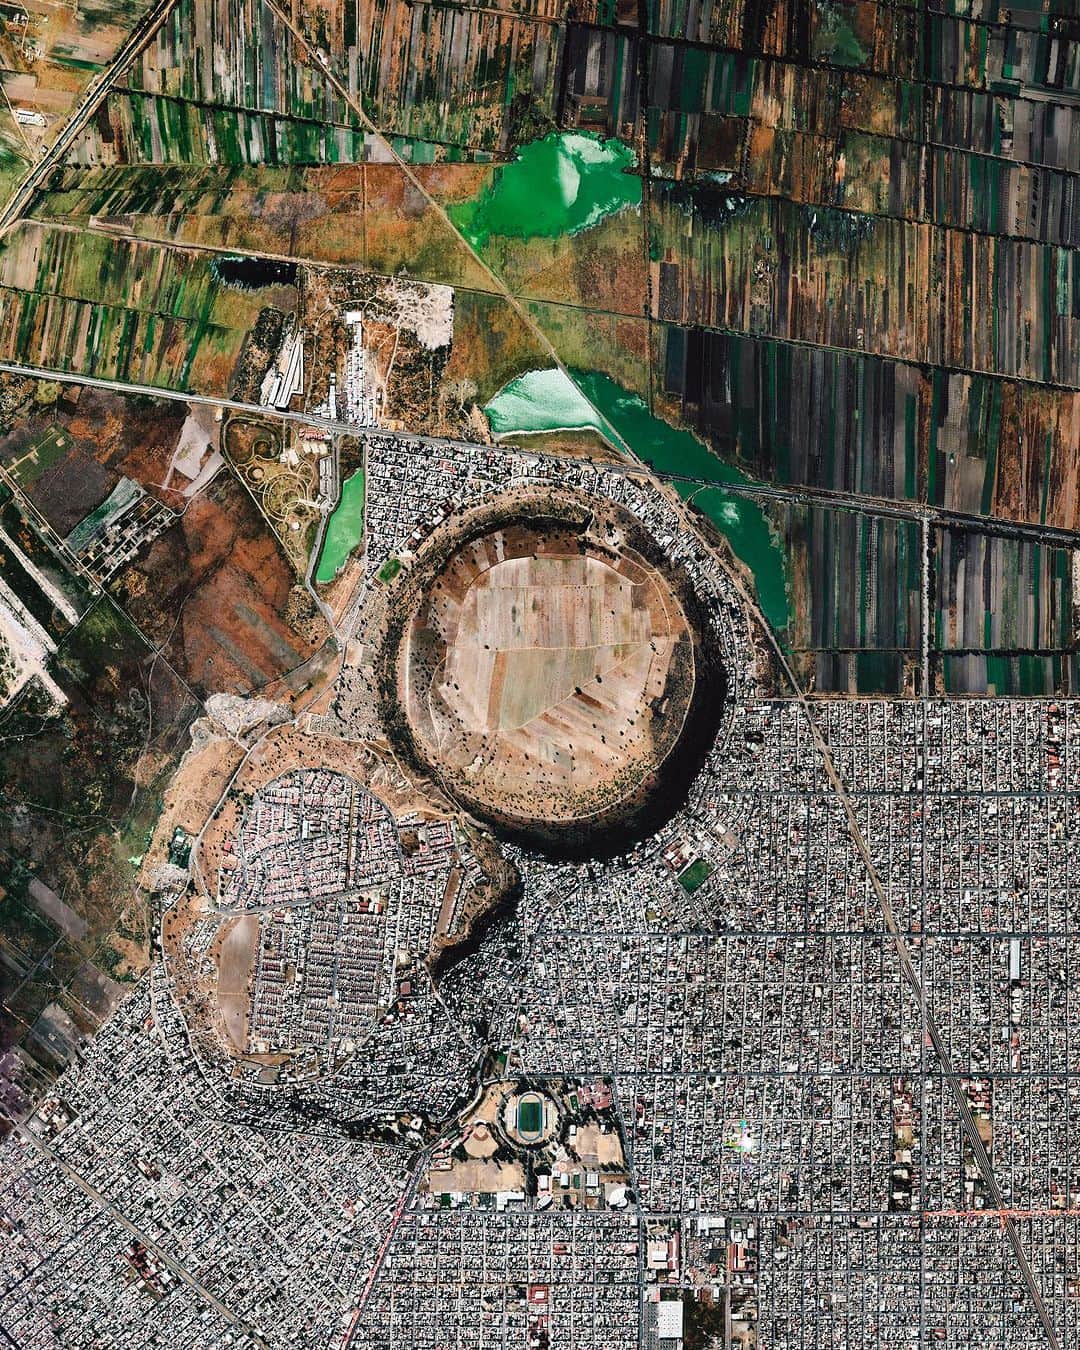 Daily Overviewのインスタグラム：「The city of Xico, in the southeastern corner of Mexico City, surrounds a large volcanic crater. Known as Cerro de Xico, or “Hill of Xico,” the 1-kilometer-wide crater provides fertile soil and naturally protected farmland amid the ever-advancing sprawl of Mexico City. The Xico Crater and all of its surroundings were once submerged by Lake Chalco until the 16th or 17th century, when the lake began to be drained for agriculture and development.  Created by @dailyoverview  Source imagery: @maxartechnologies」